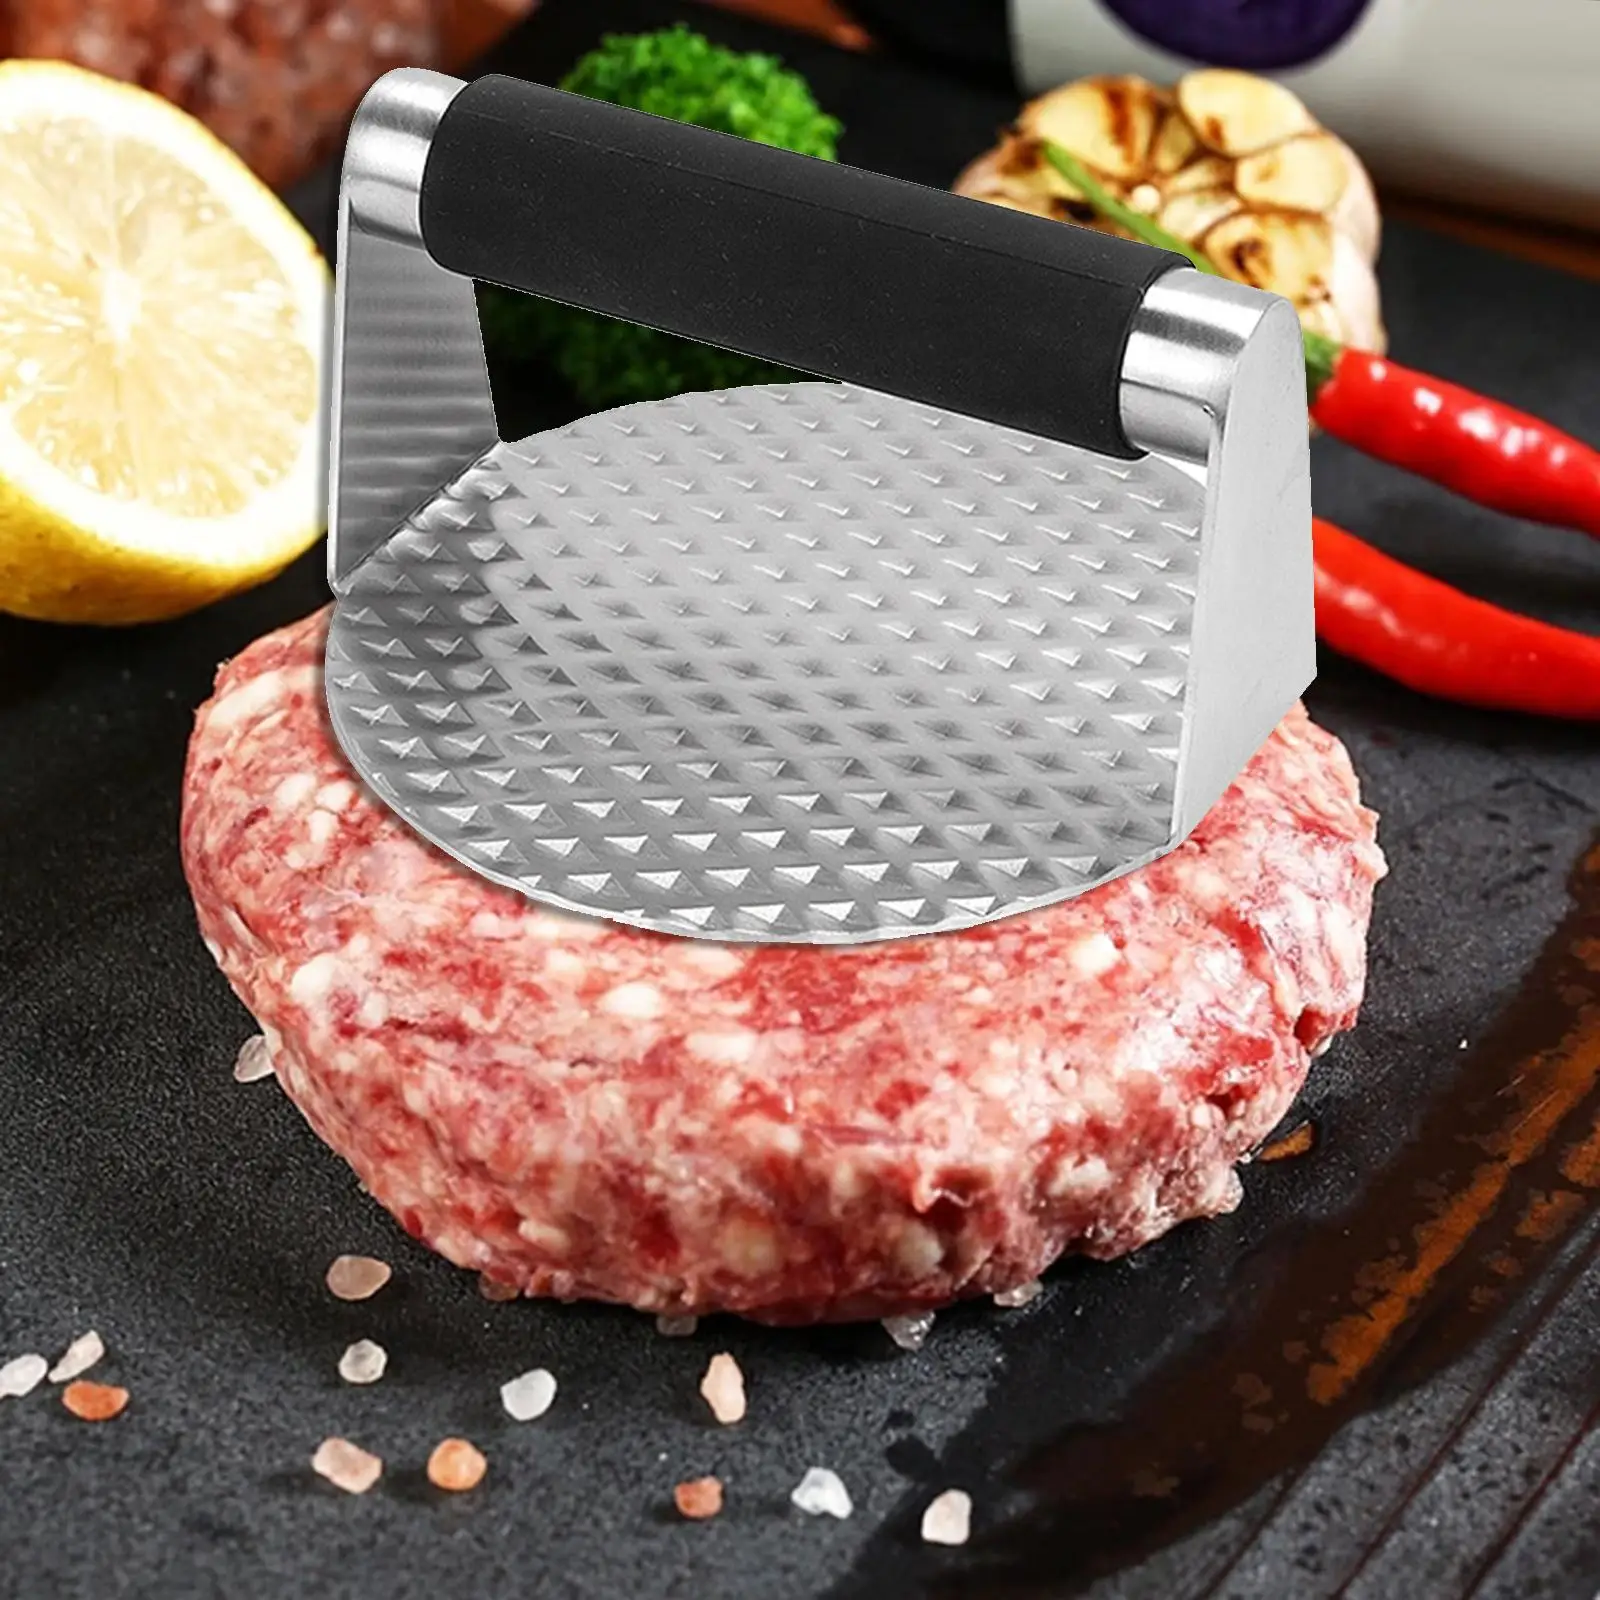 Stainless Steel Burger Press Nonstick Kitchen Accessories Baking Tools Grill Press for Steaks Sandwich Grill Cooking